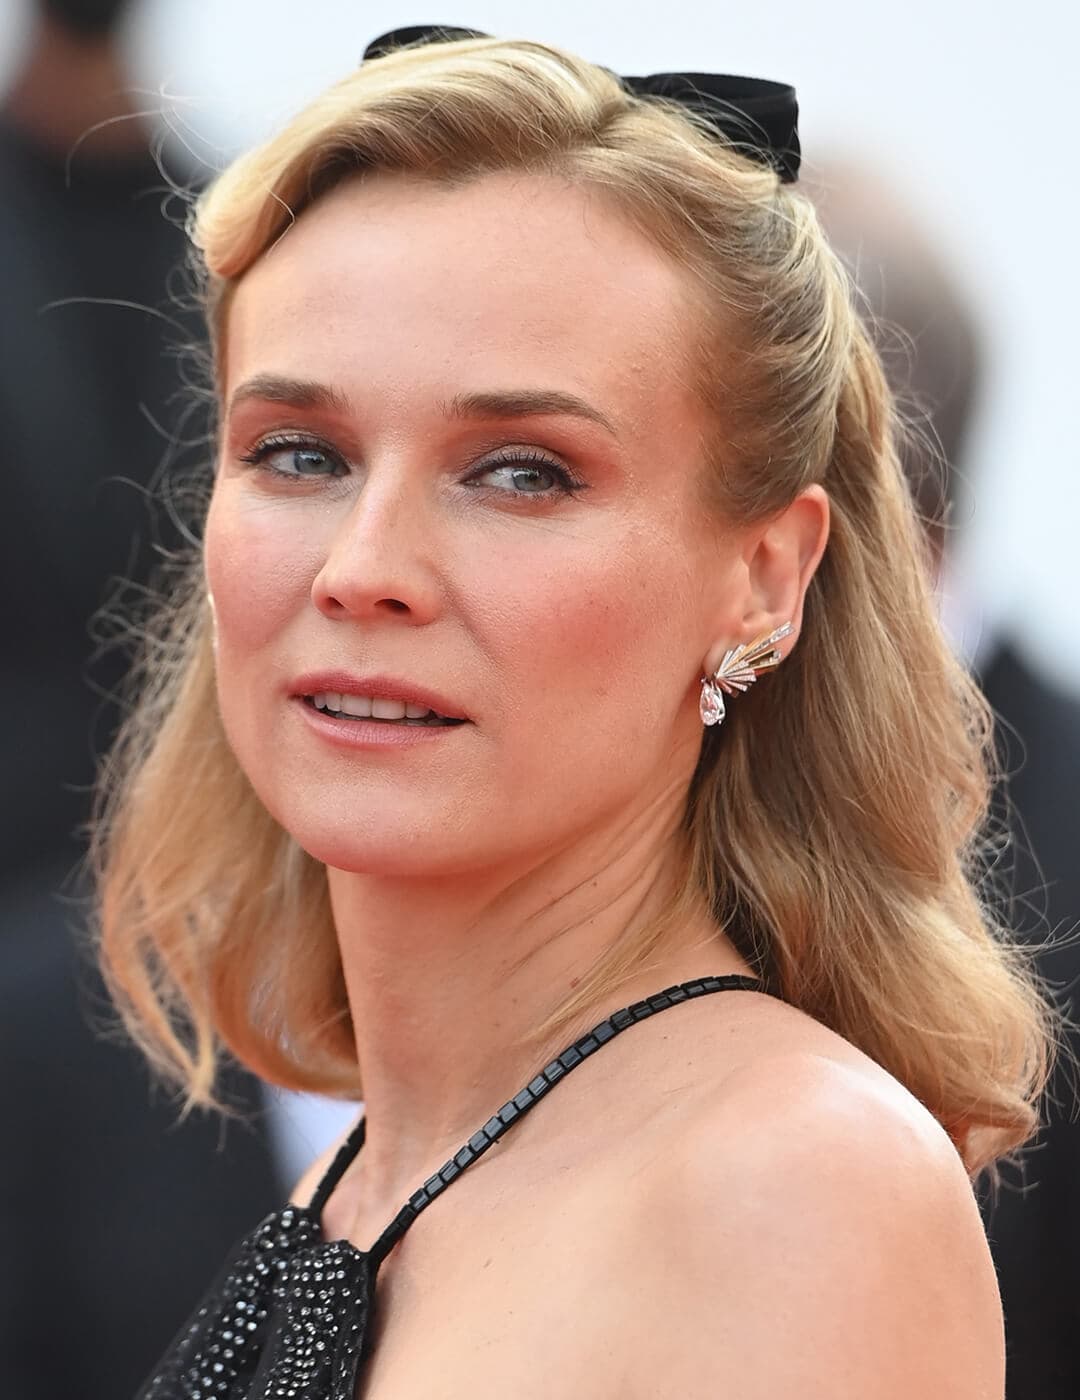 Diane Kruger rocking a retro-inspired half updo hairstyle with matching black velvet bow at the red carpet